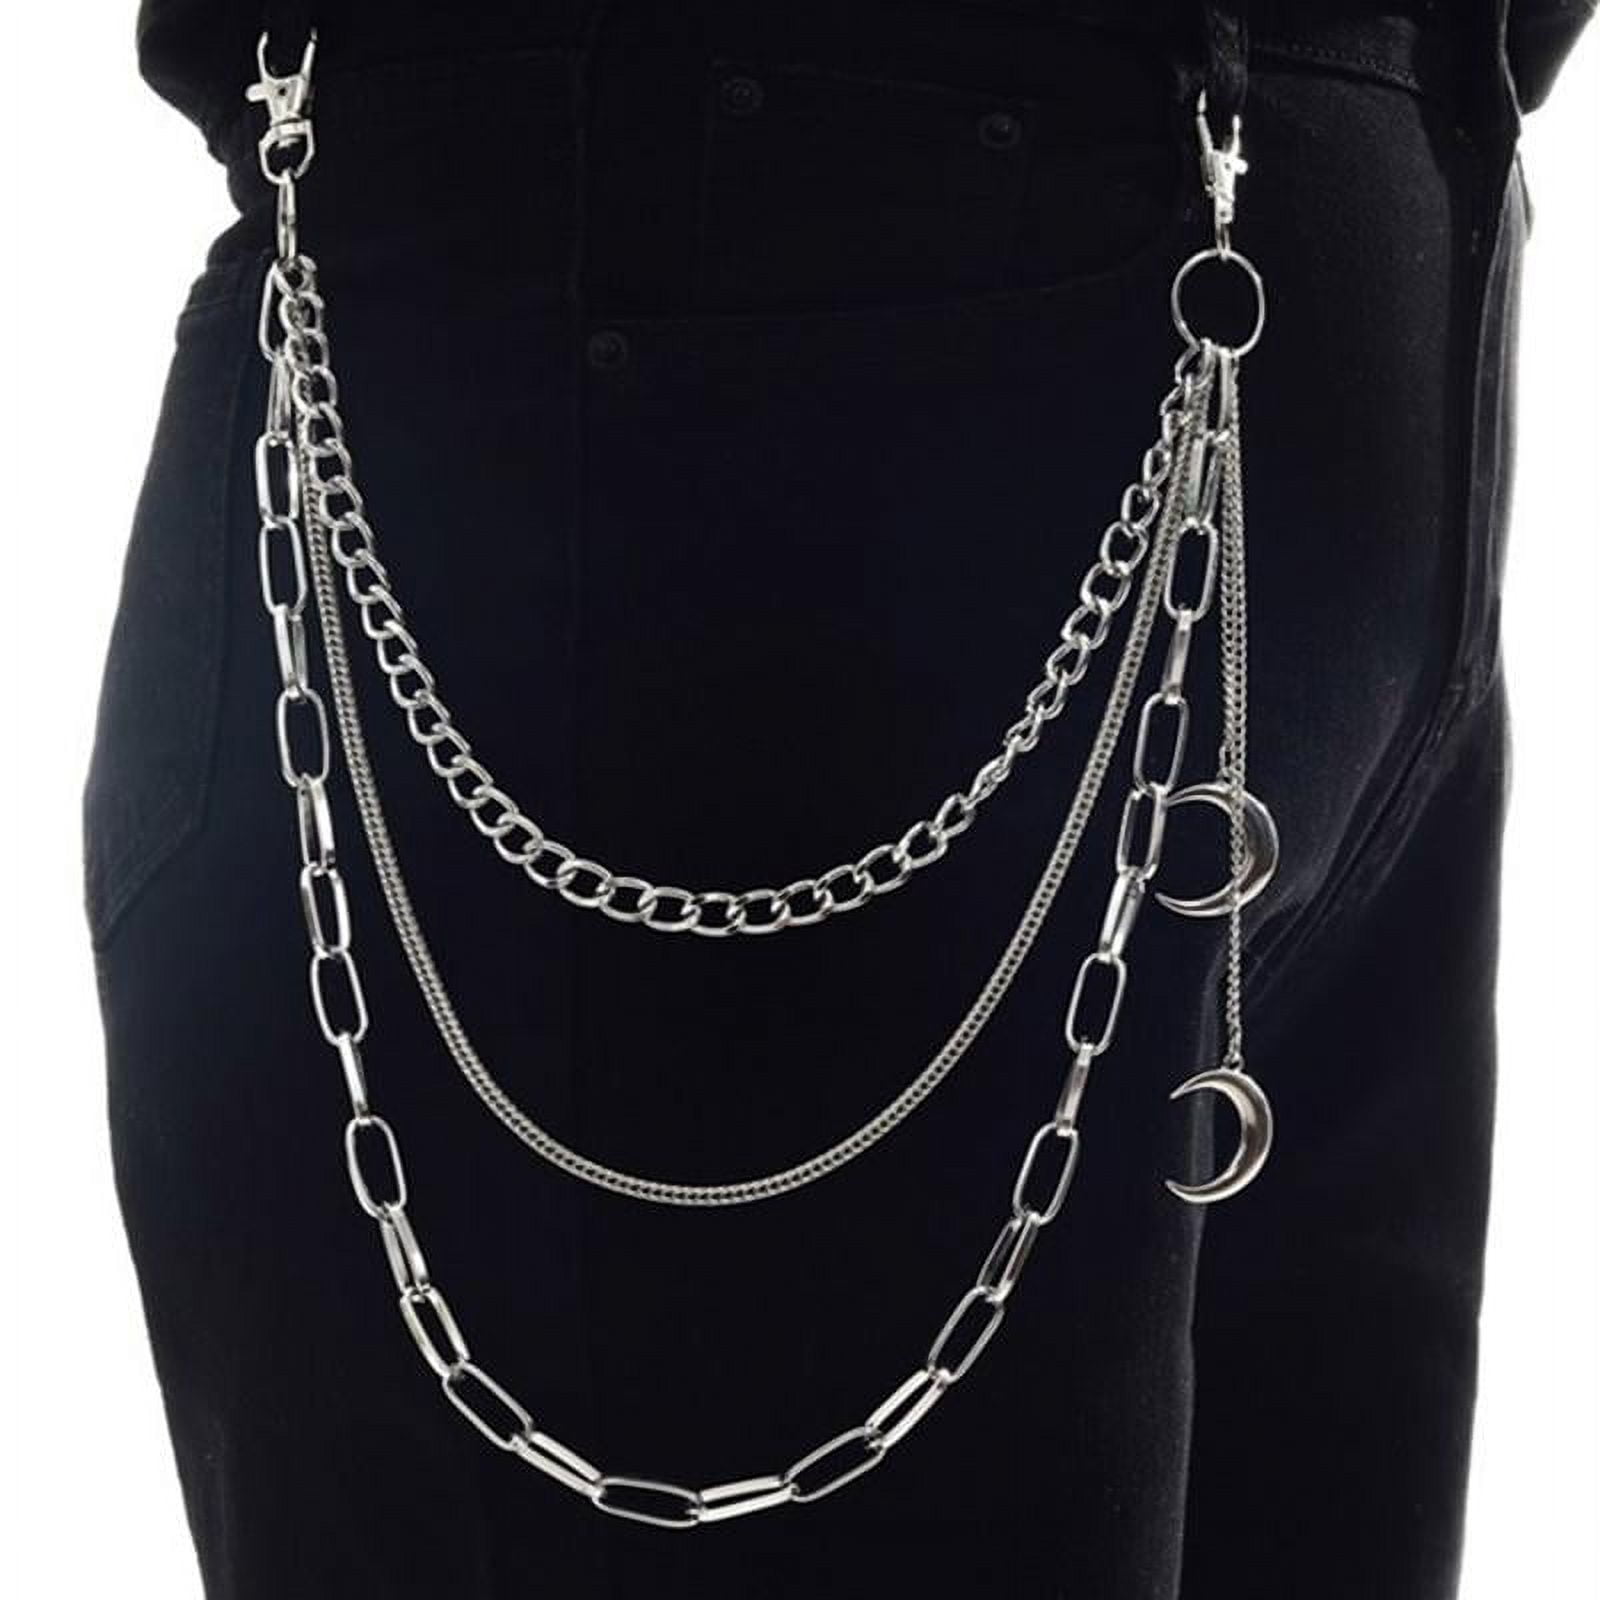 TINYSOME Hip Hop Chain Rock Pocket Chains Secure Travel Wallet Chain Metal  Vintage Punk Jean Chains All-match for Male Female 